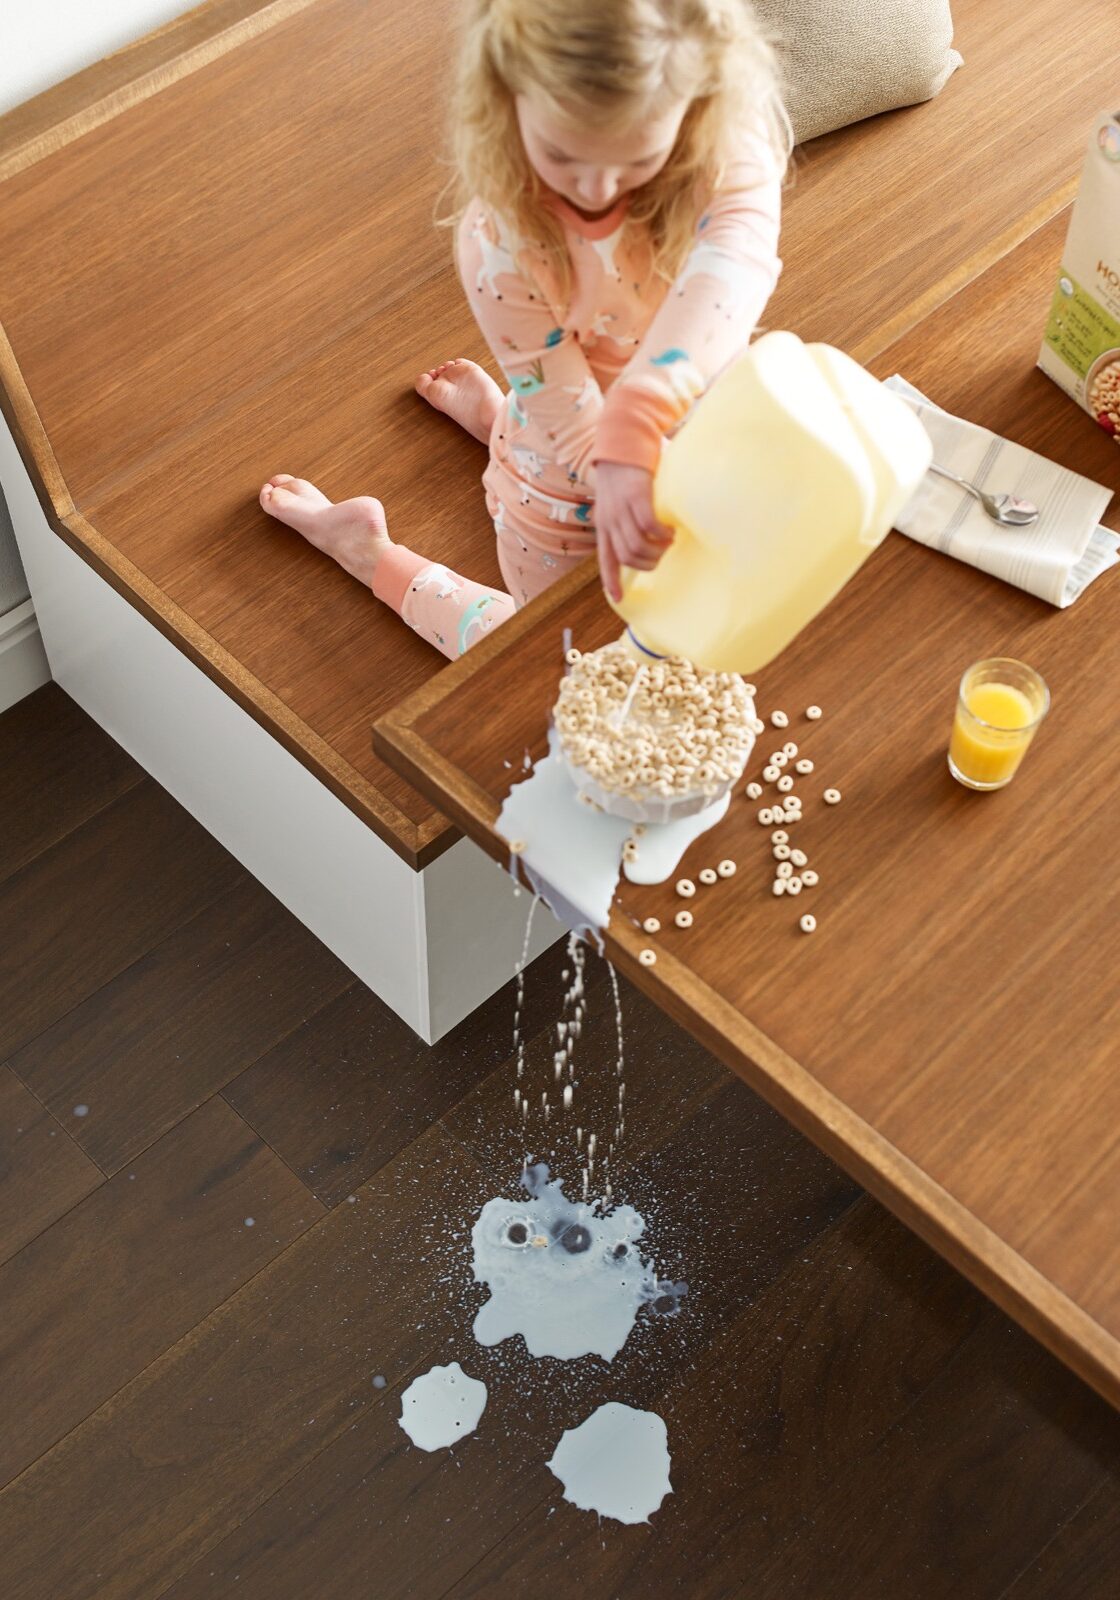 Milk spill cleaning